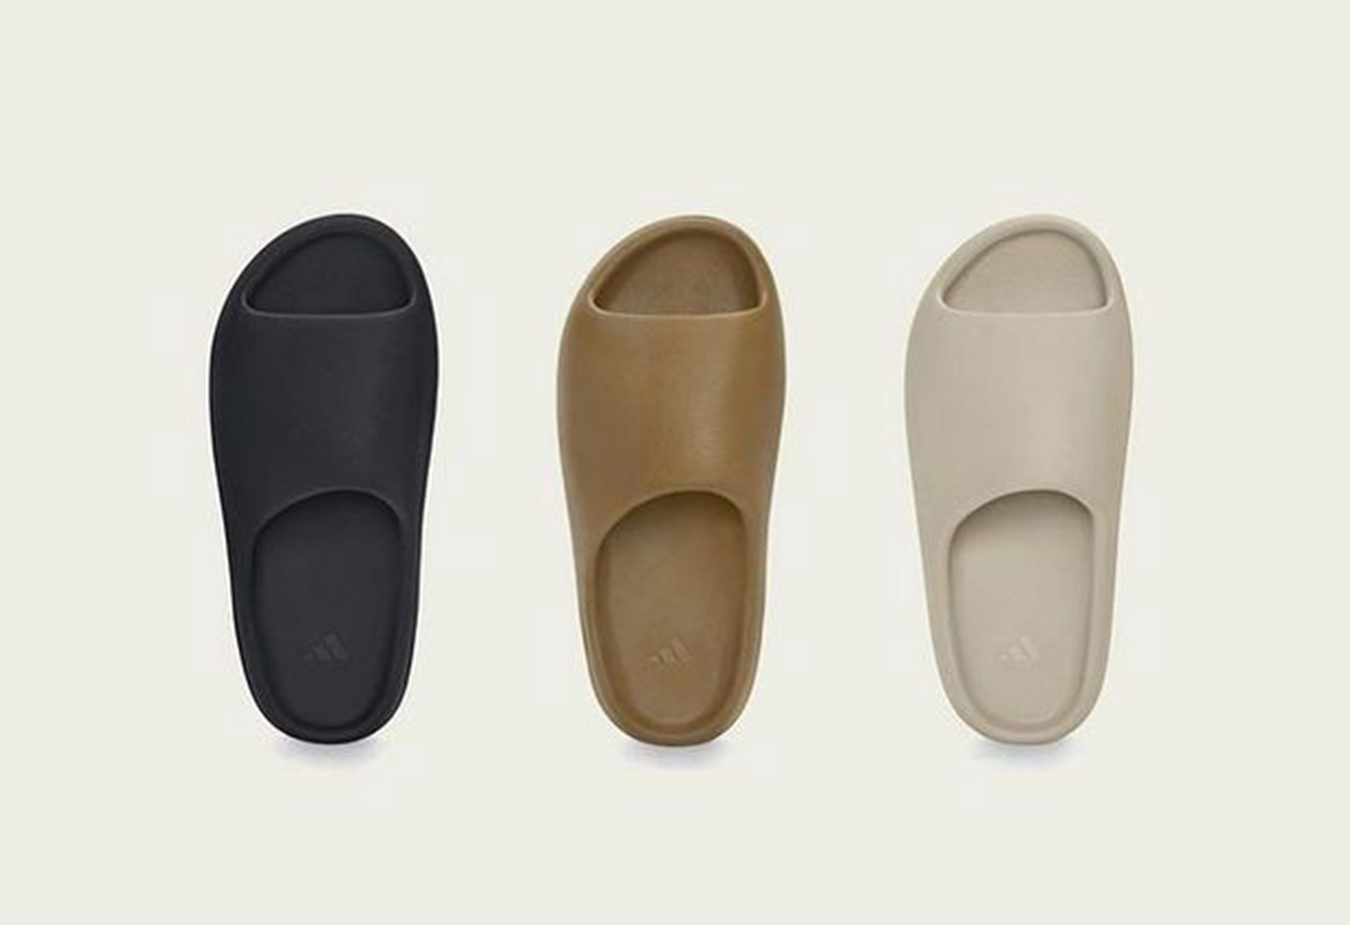 Adidas Indonesia Dropped a New Yeezy Slides Today!